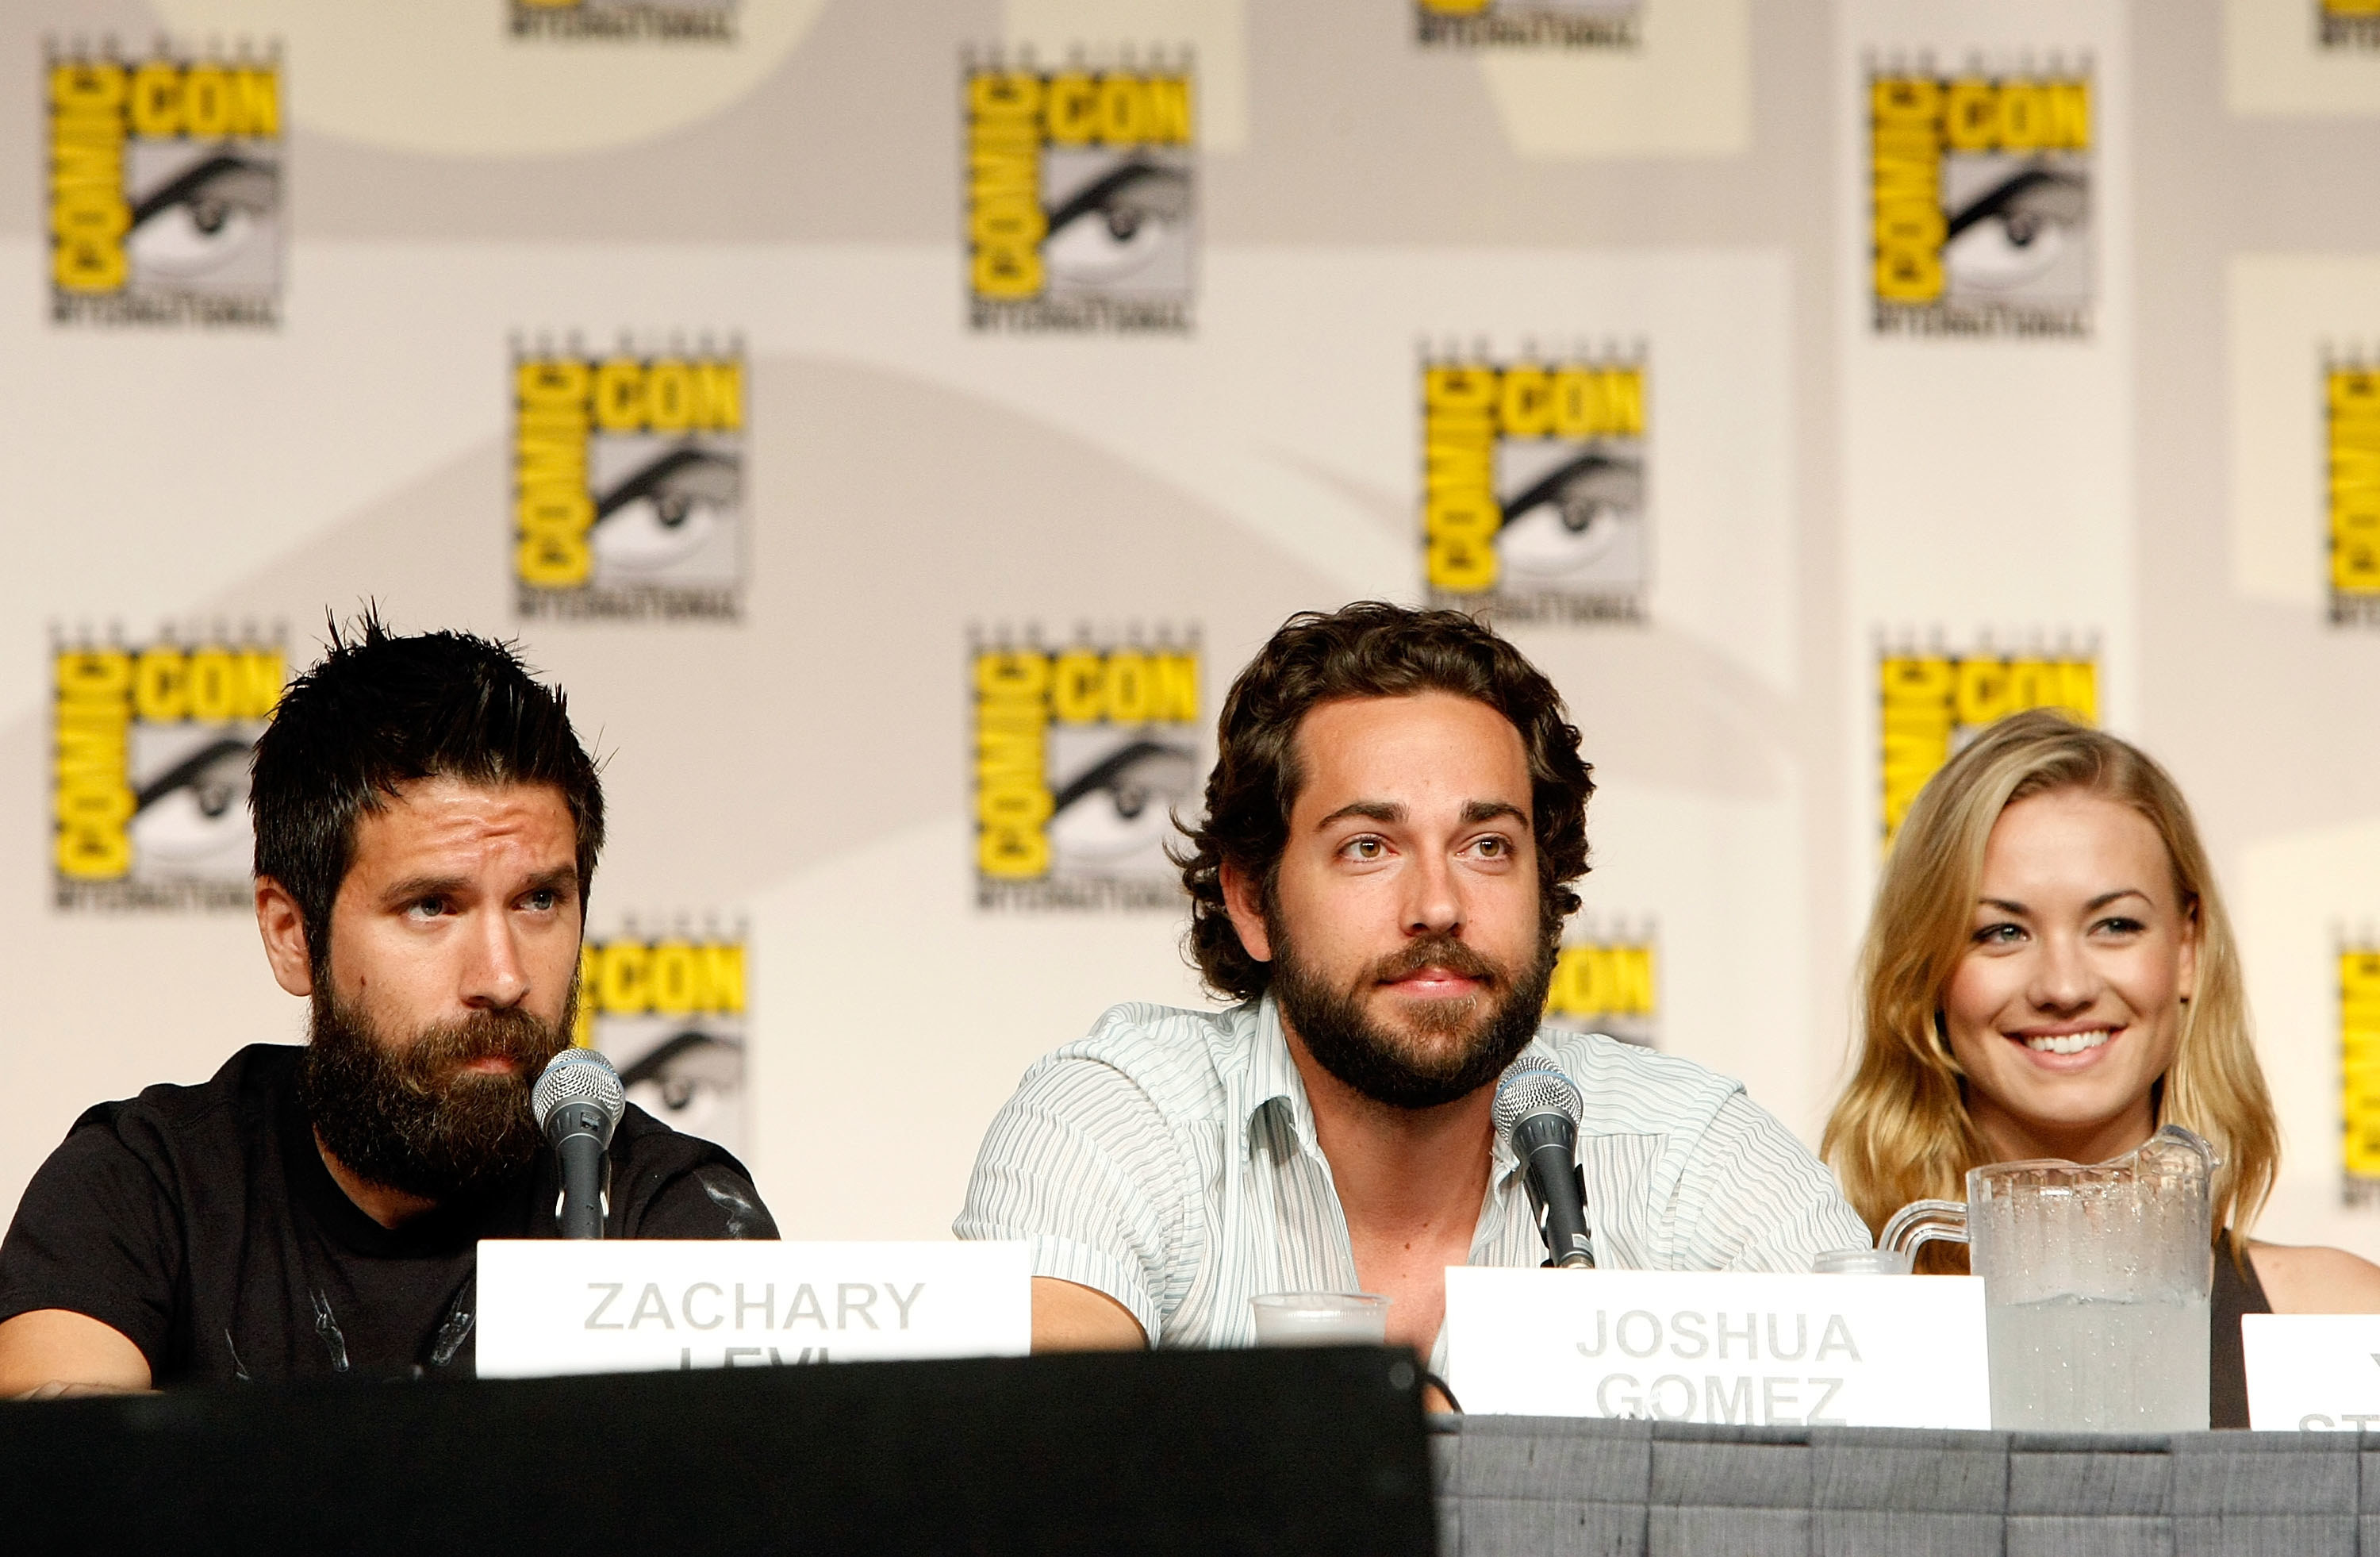 A younger Zachary Levi at a Comic-Con panel for Chuck with Yvonne Strahovski and Joshua Gomez